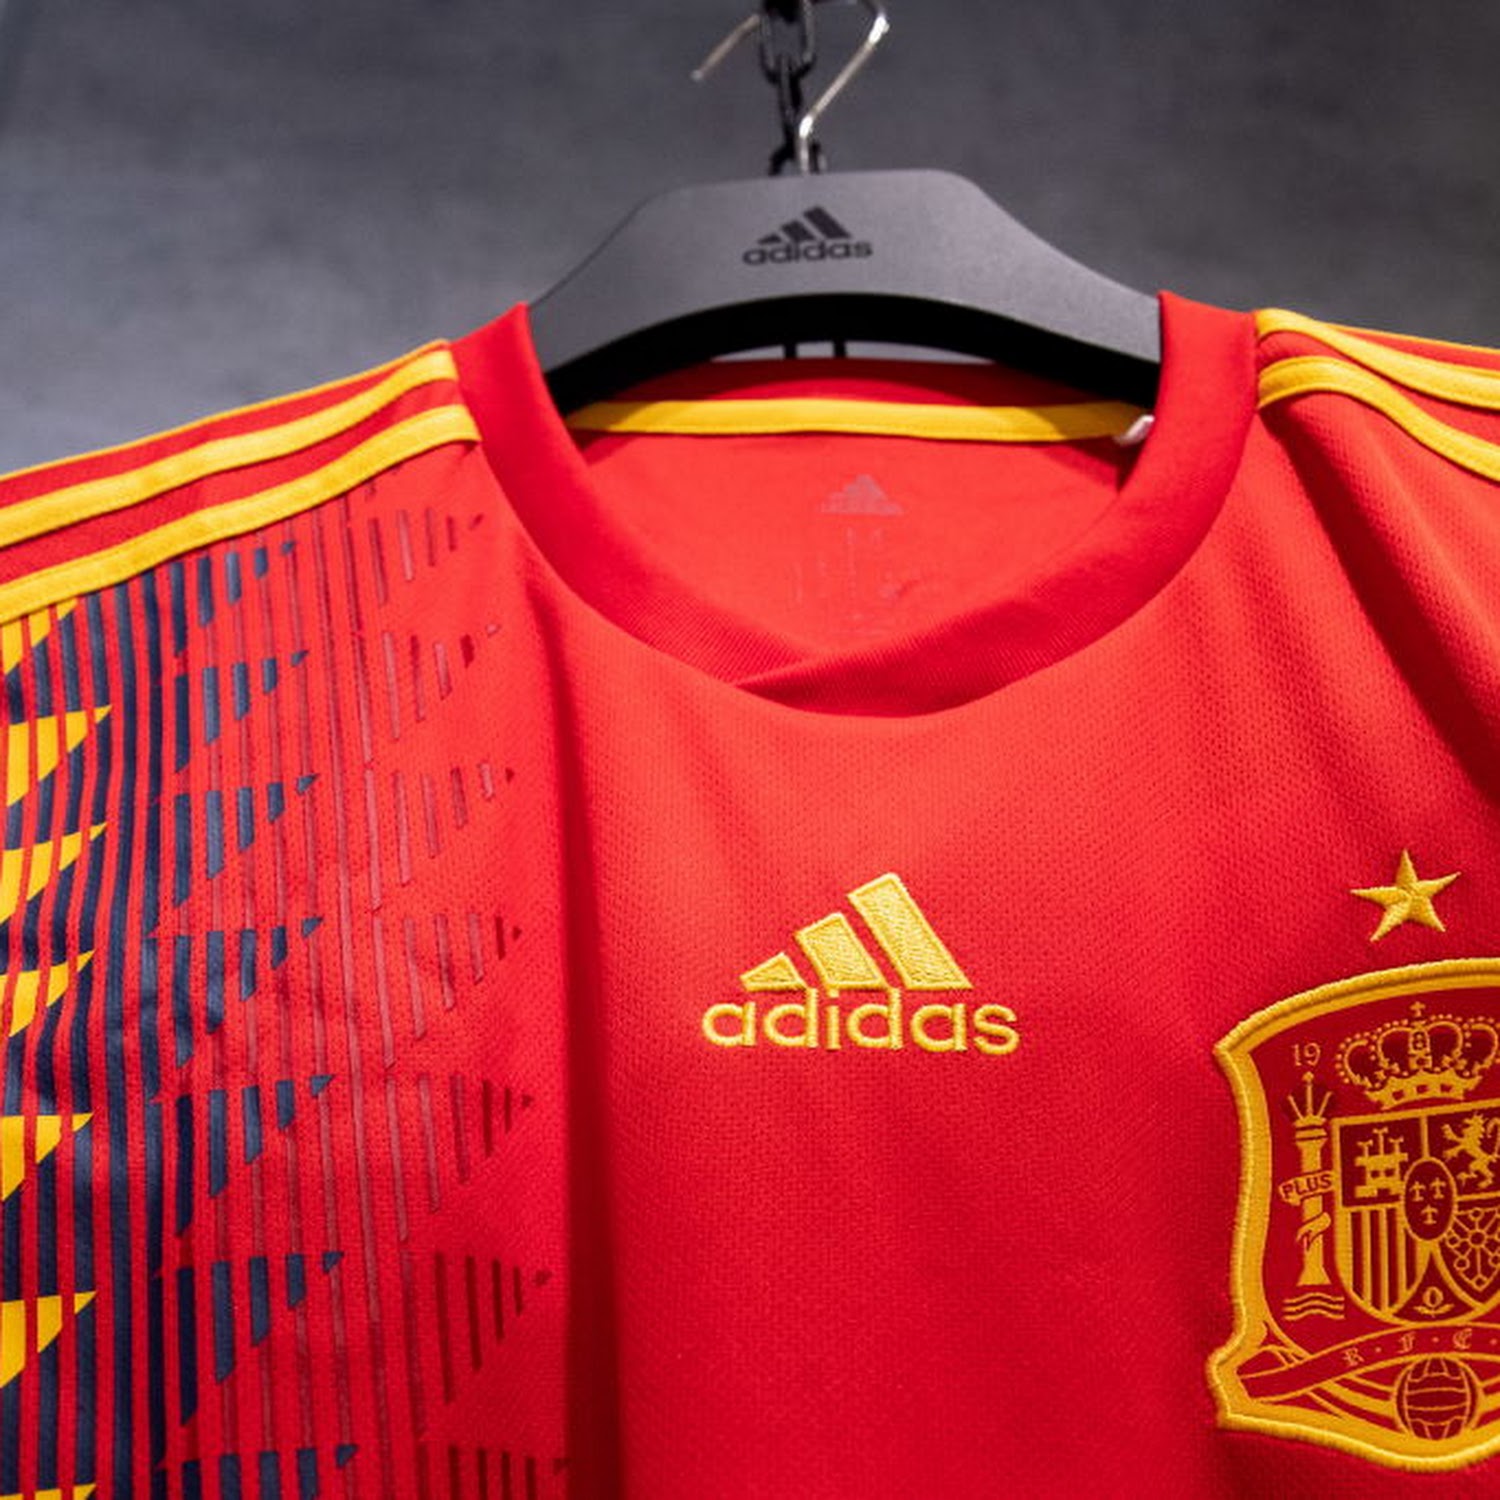 What's involved in designing World Cup jerseys?